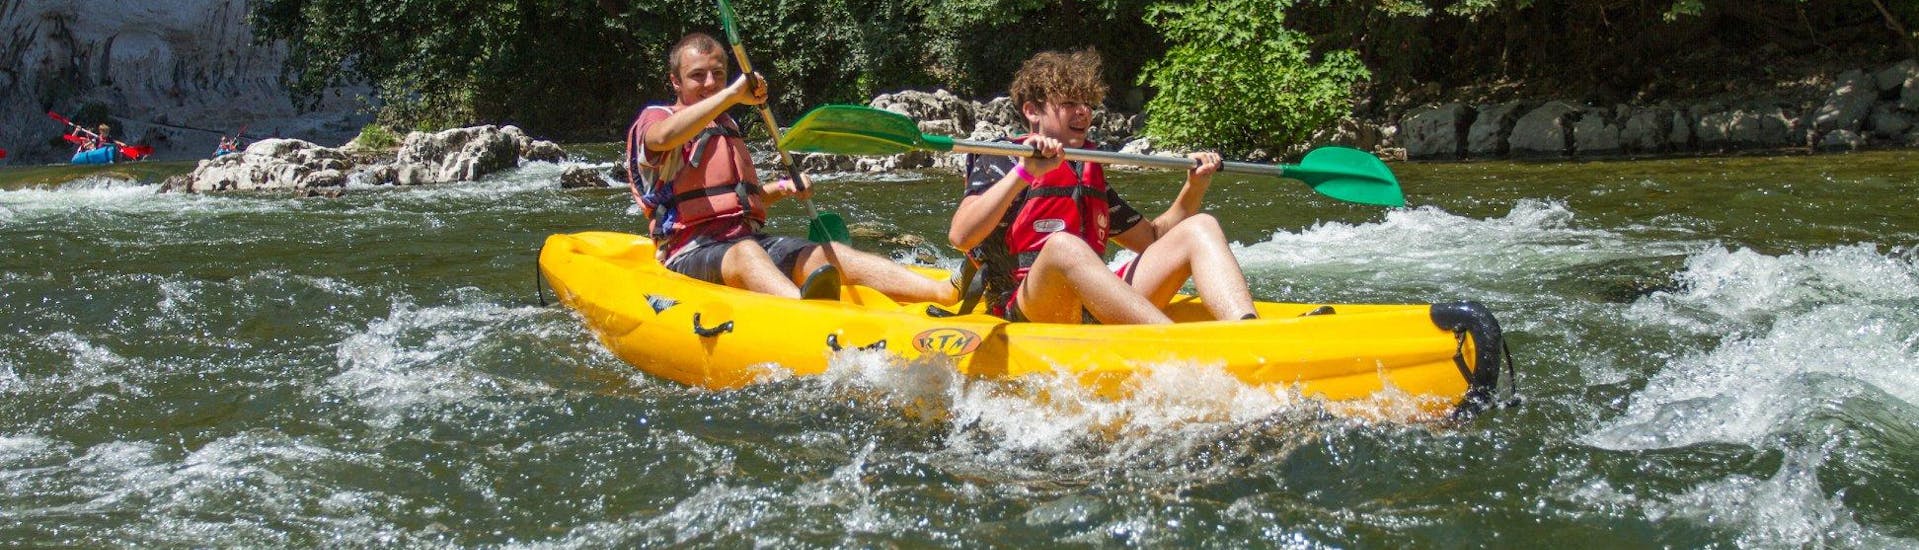 Two young boy having fun on a 6km Canoe Hire in Ardèche - Mini-Tour provided by Viking Bateaux.